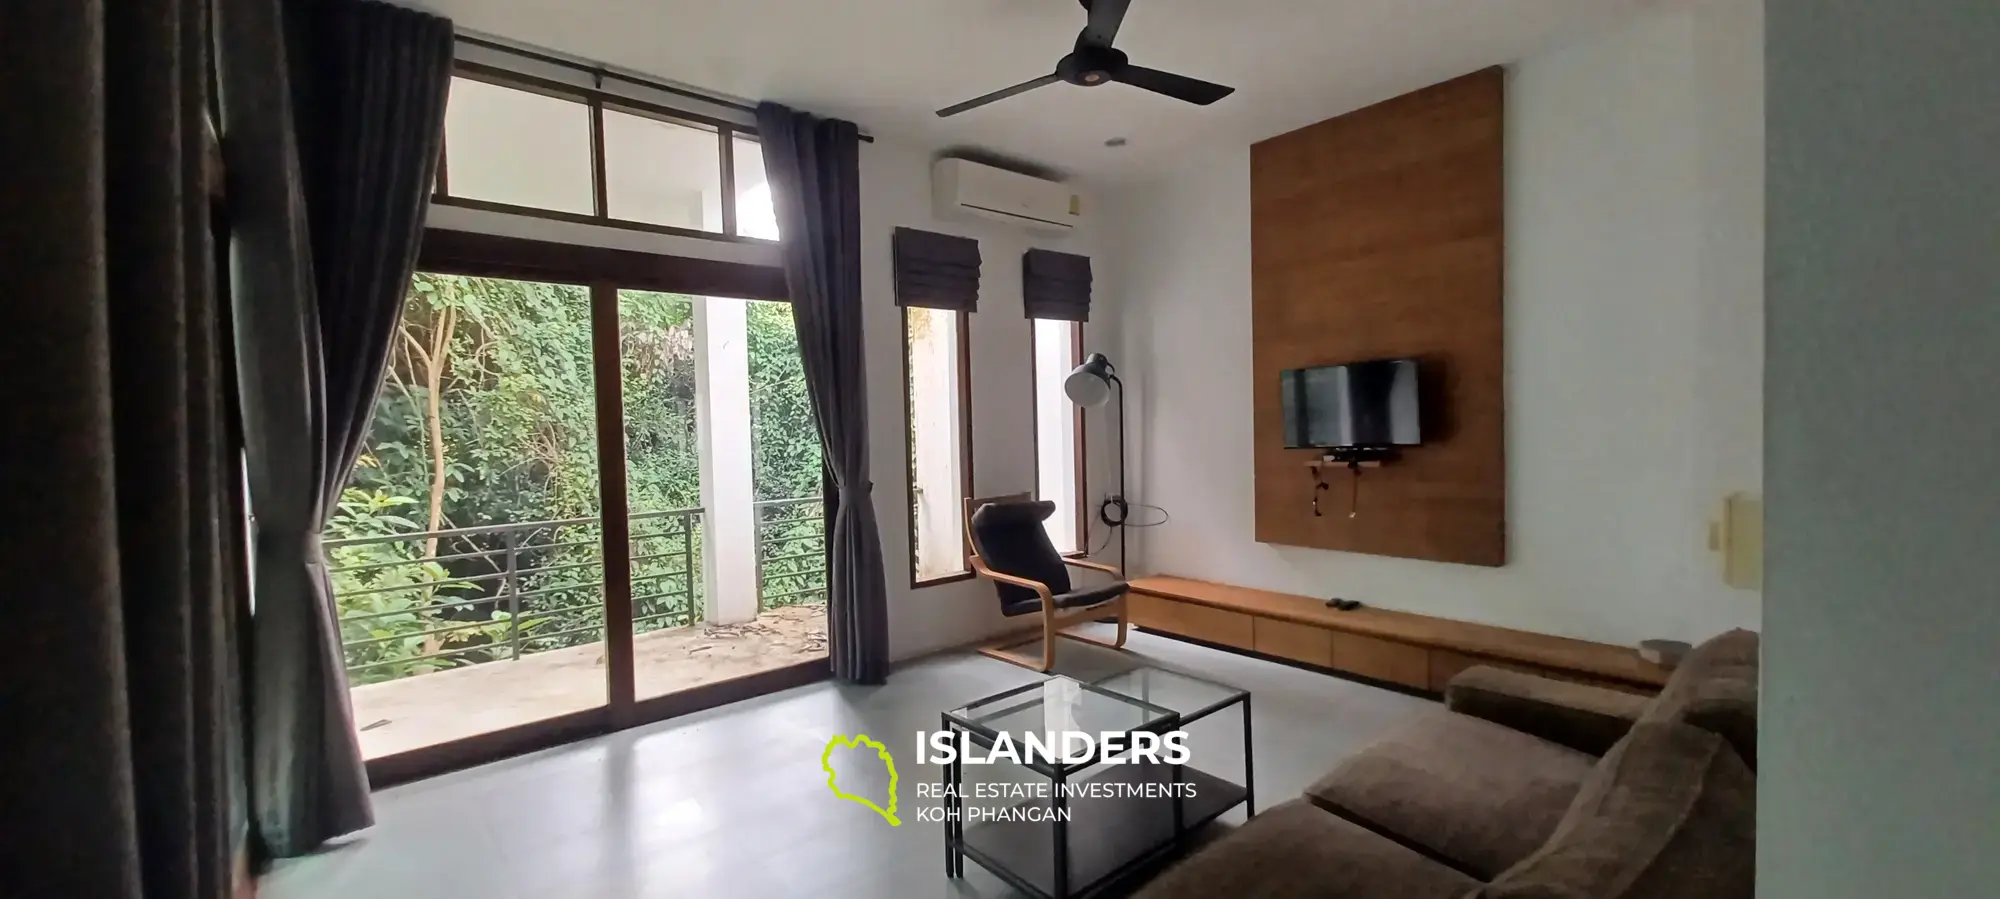 Chaweng noi, 3 bedrooms, jungle view villa with swimming pool.